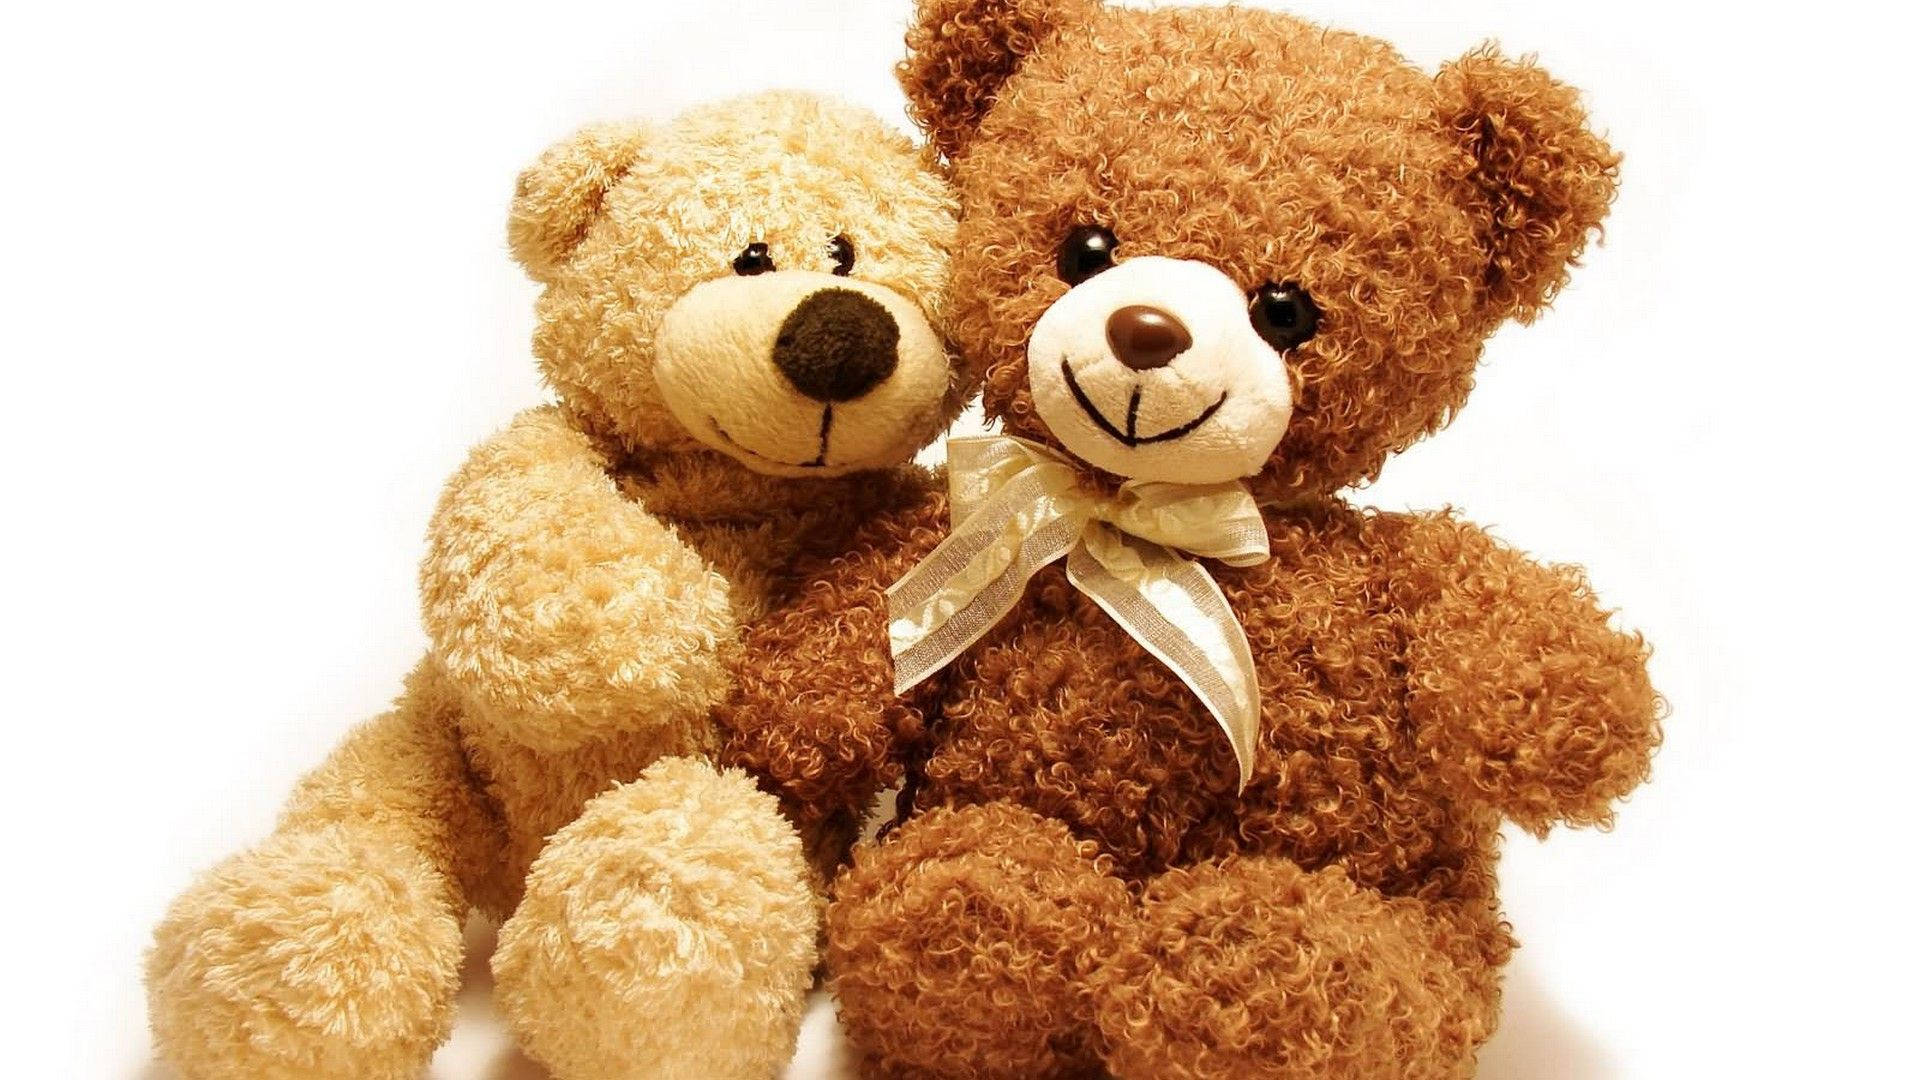 Teddy Bear HD Wallpaper, Free Teddy Bear Wallpaper Image For All Devices